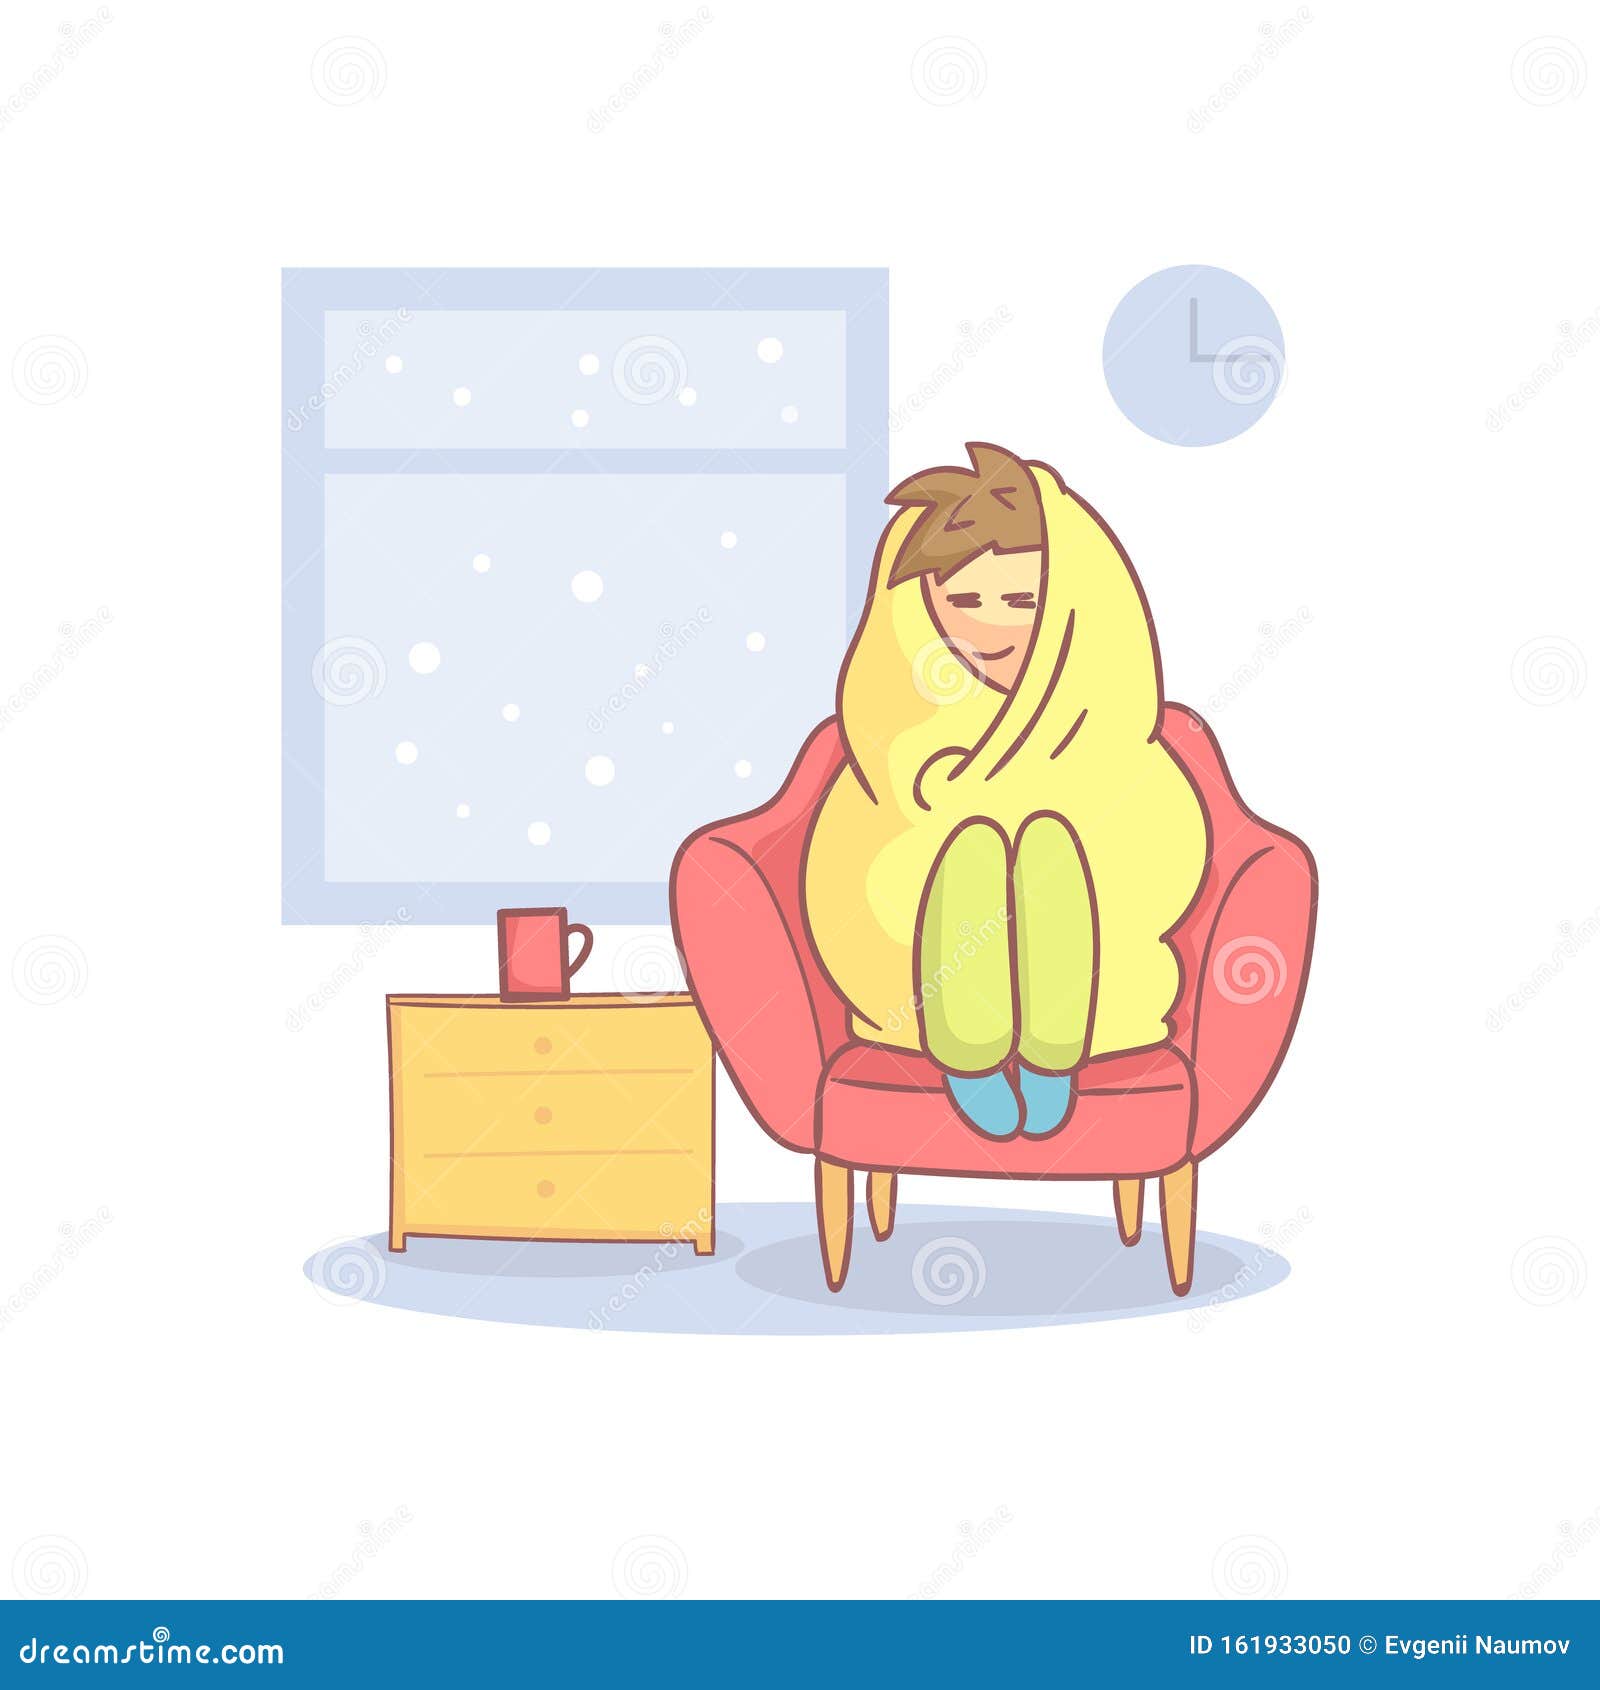 Lazy Apathetic Young Man Wrapped in a Blanket Sitting in Armchair Vector  Illustration Stock Vector - Illustration of lazy, person: 161933050